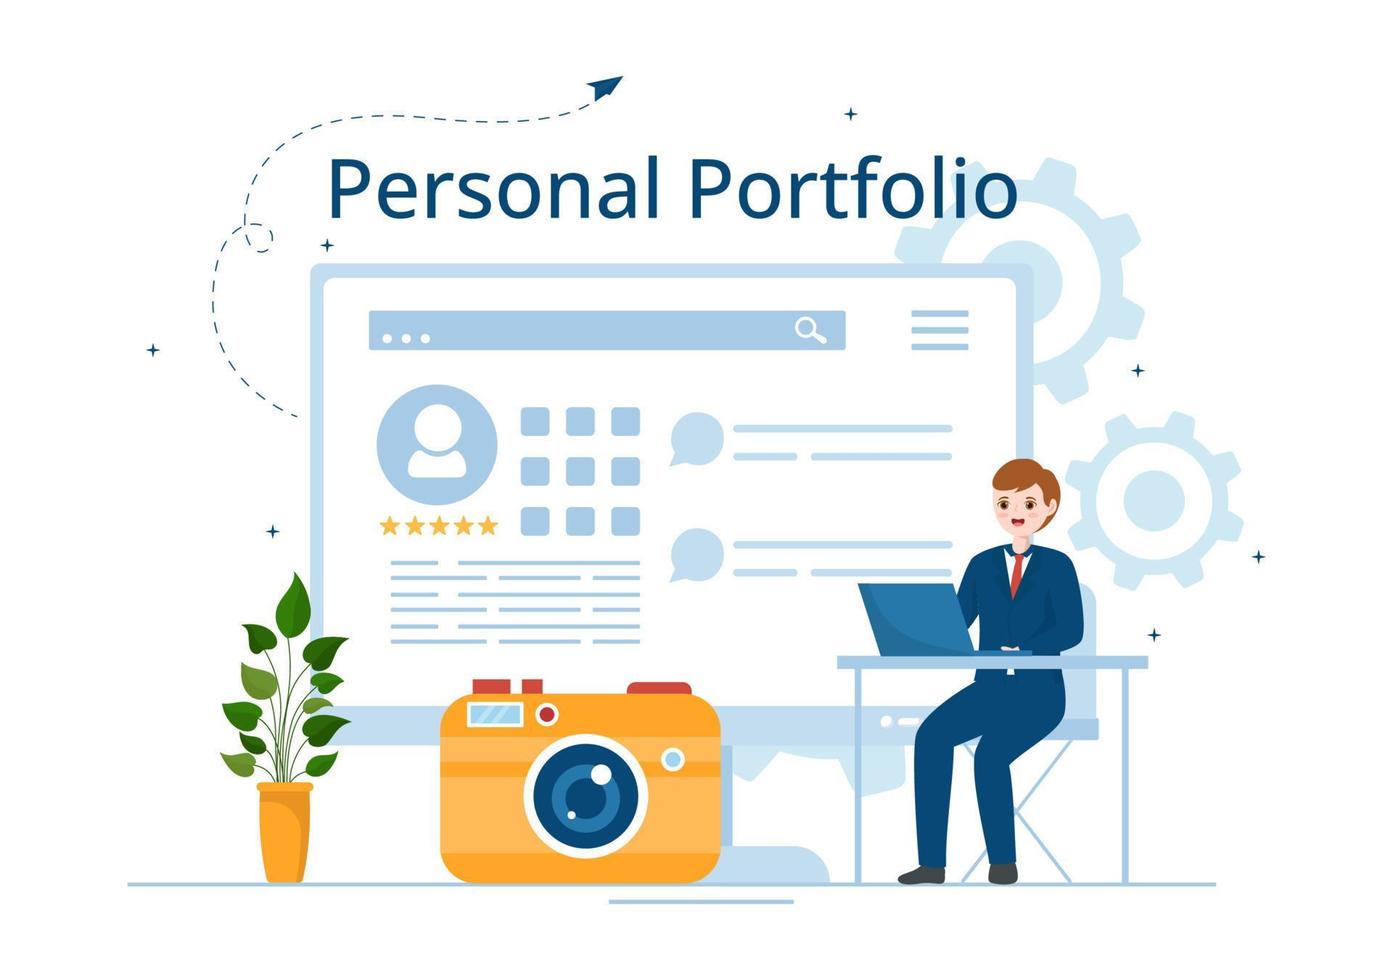 Personal Portfolio with Profile Data, Resume or Self Improvement to Attract Clients and Employers in Flat Cartoon Hand Drawn Templates Illustration vector